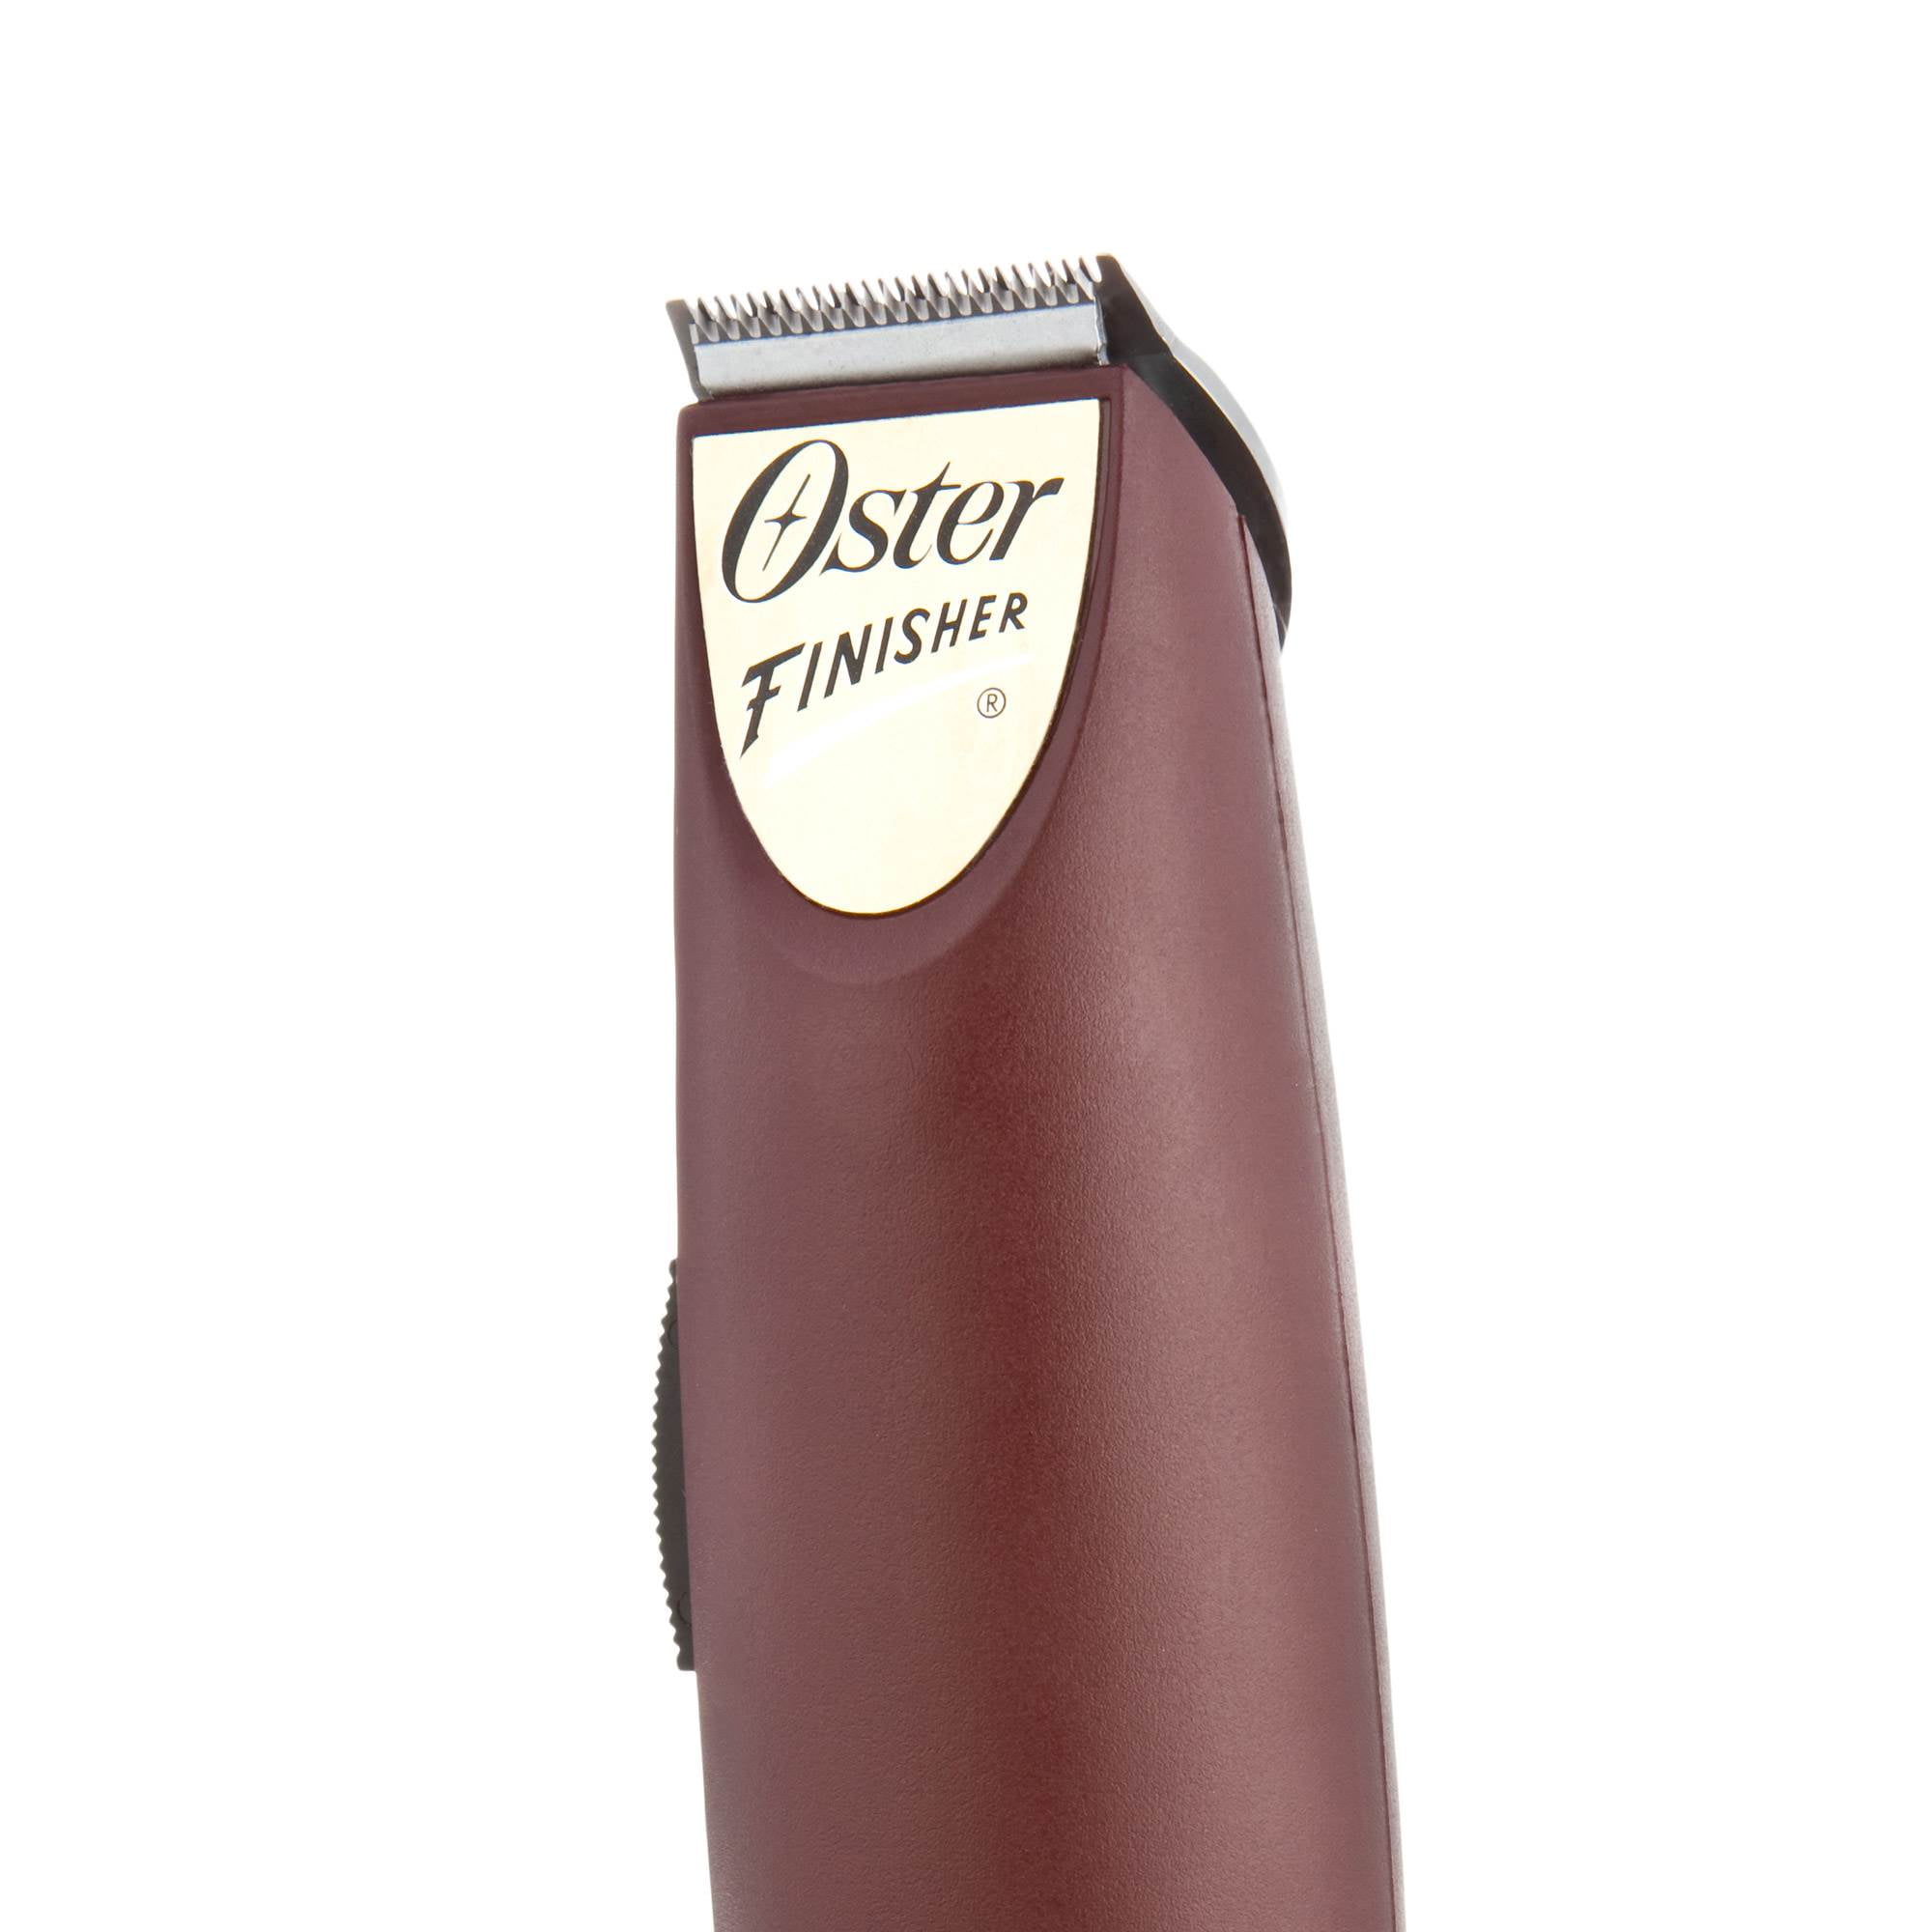 oster finisher narrow blade trimmer